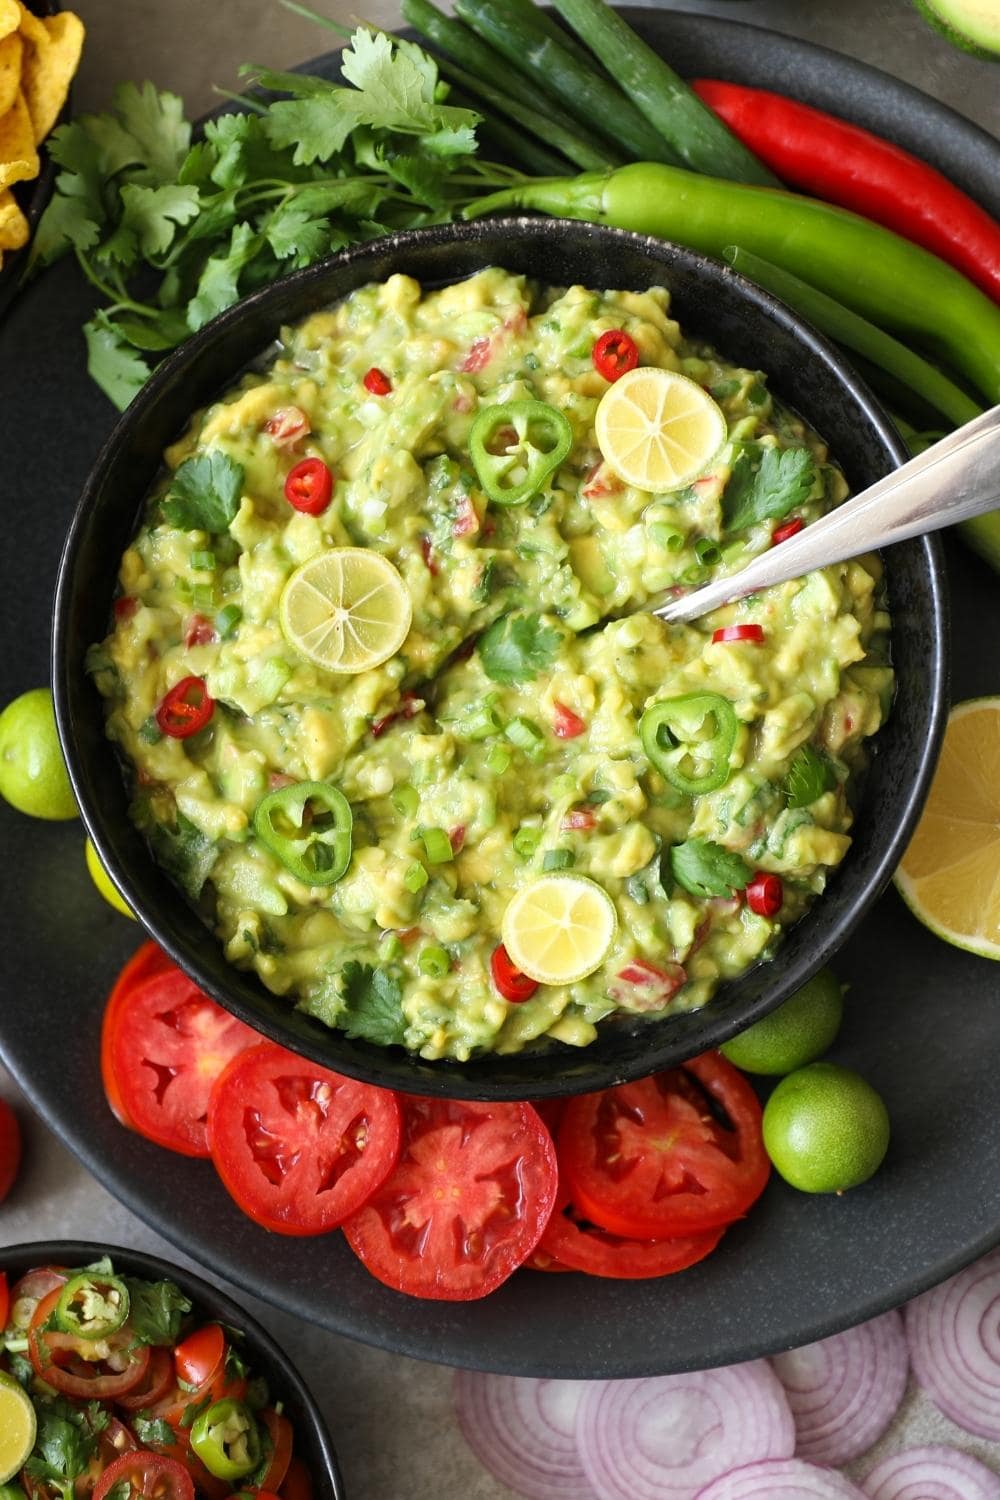 10 Best Avocado Dips That Go Beyond Guacamole - Insanely Good